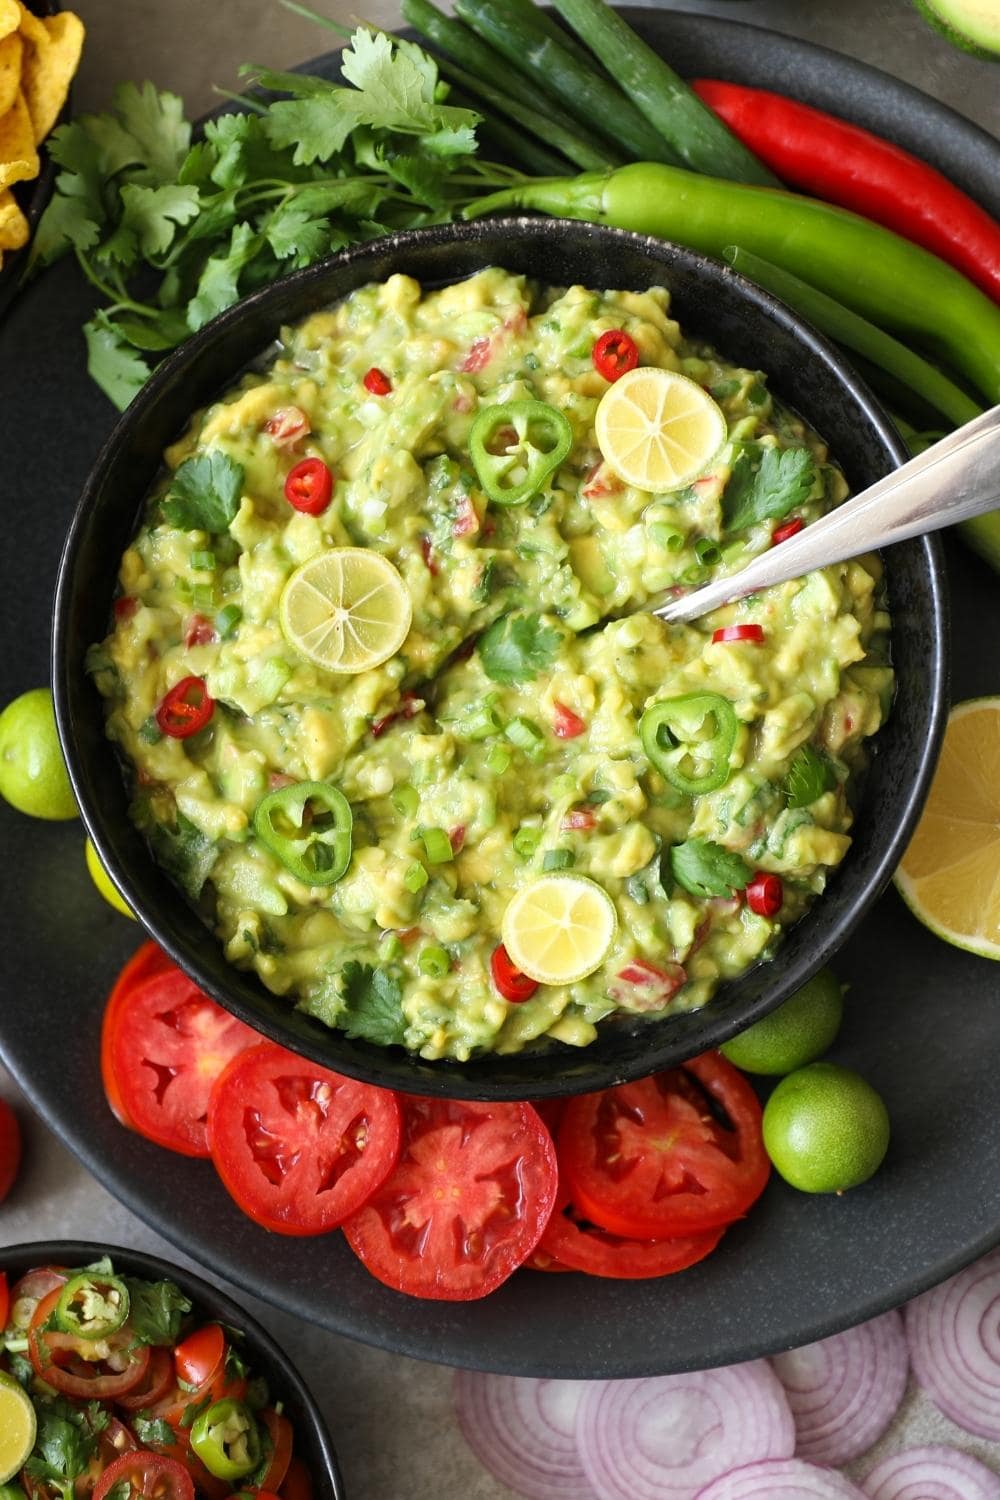 10 Best Avocado Dips That Go Beyond Guacamole - Insanely Good